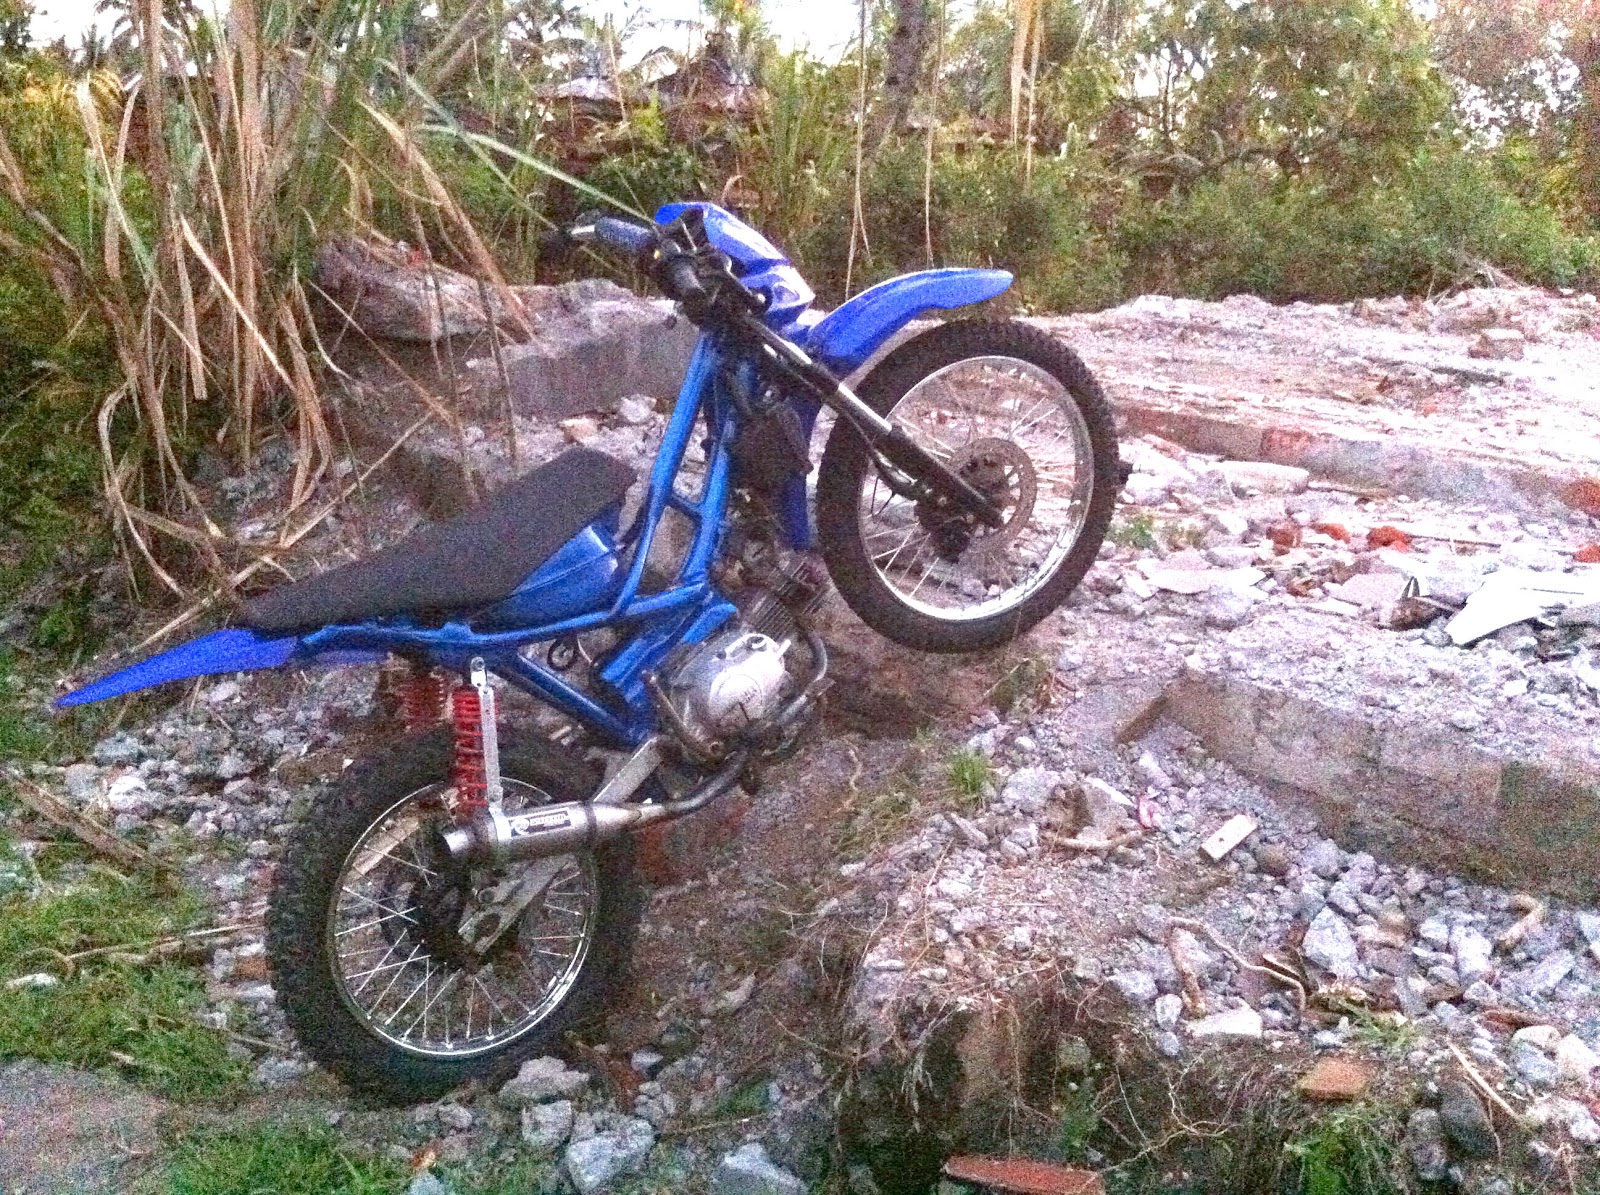 Download image Modifikasi Motor Trail 615 168 PC, Android, iPhone and 